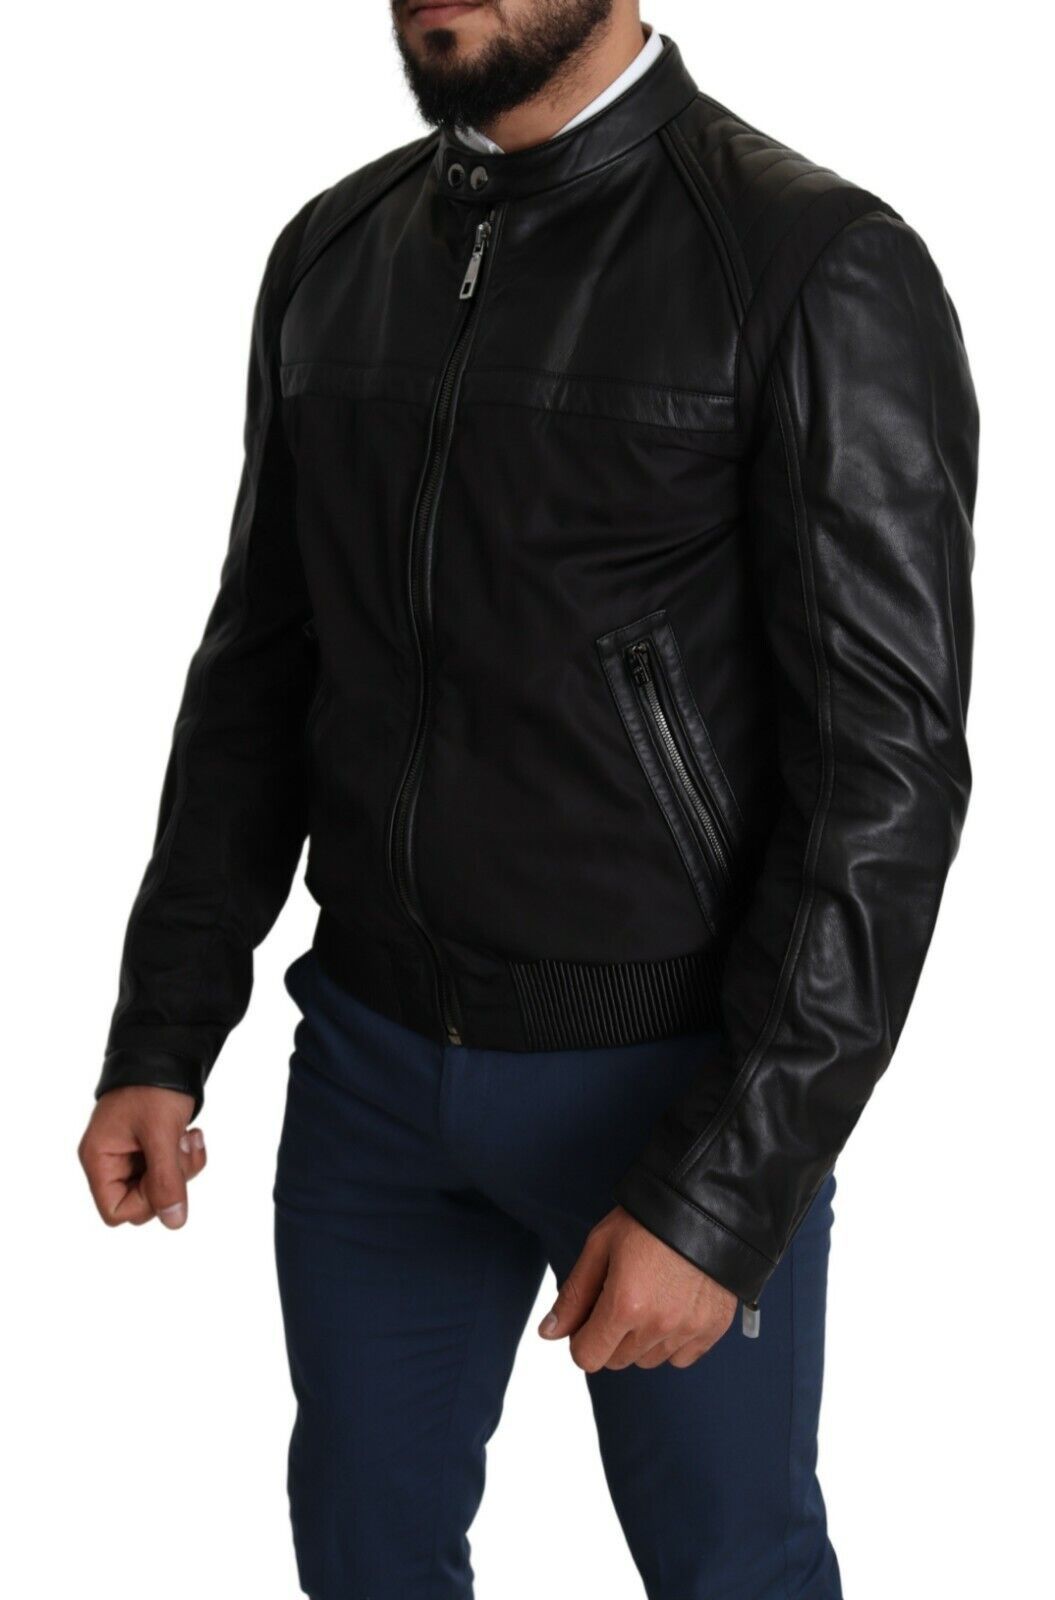 Elegant Black Bomber with Leather Accents